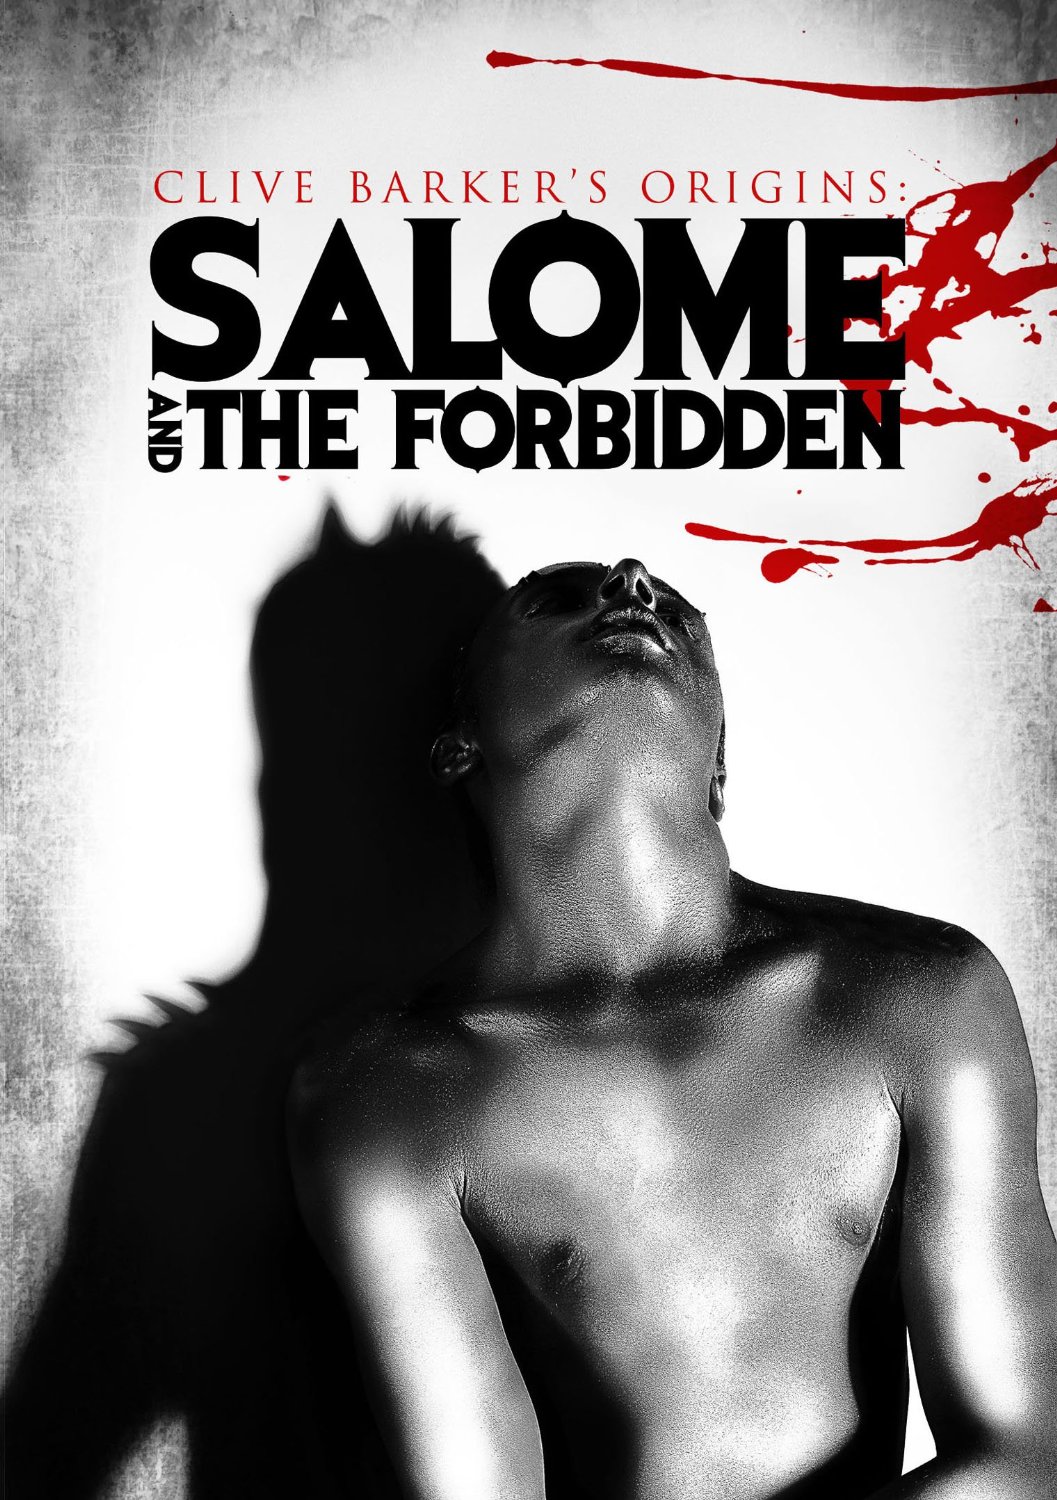 Clive Barker's Origins: Salomé and The Forbidden - www.